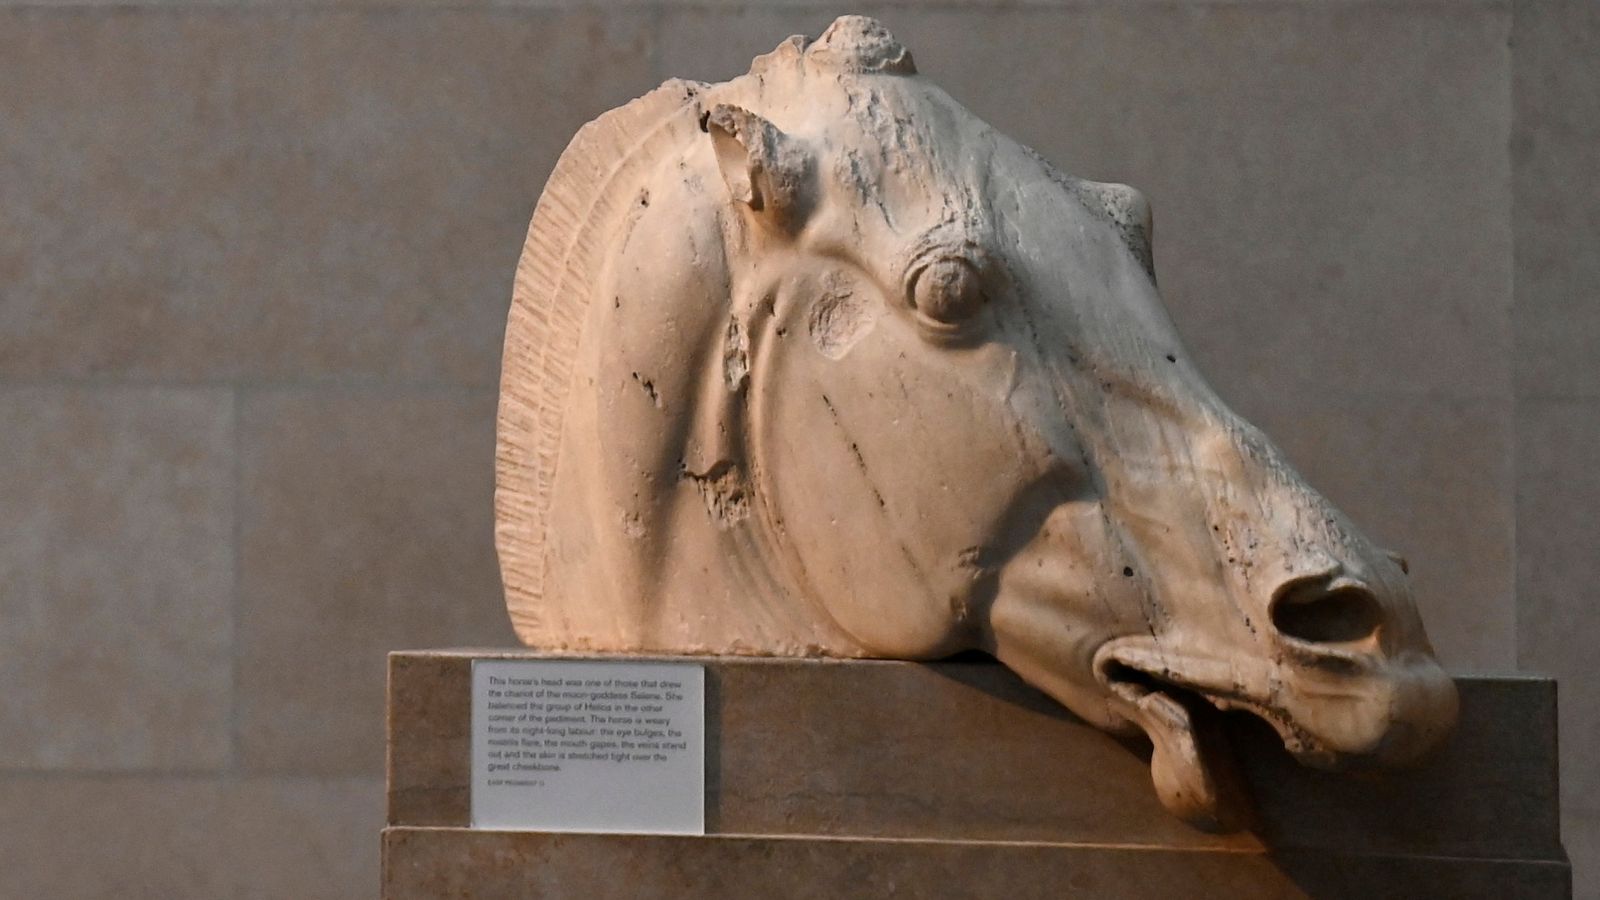 UK officials eye legally blocking Elgin Marbles returning as Greek PM complains of cancelled Sunak meeting